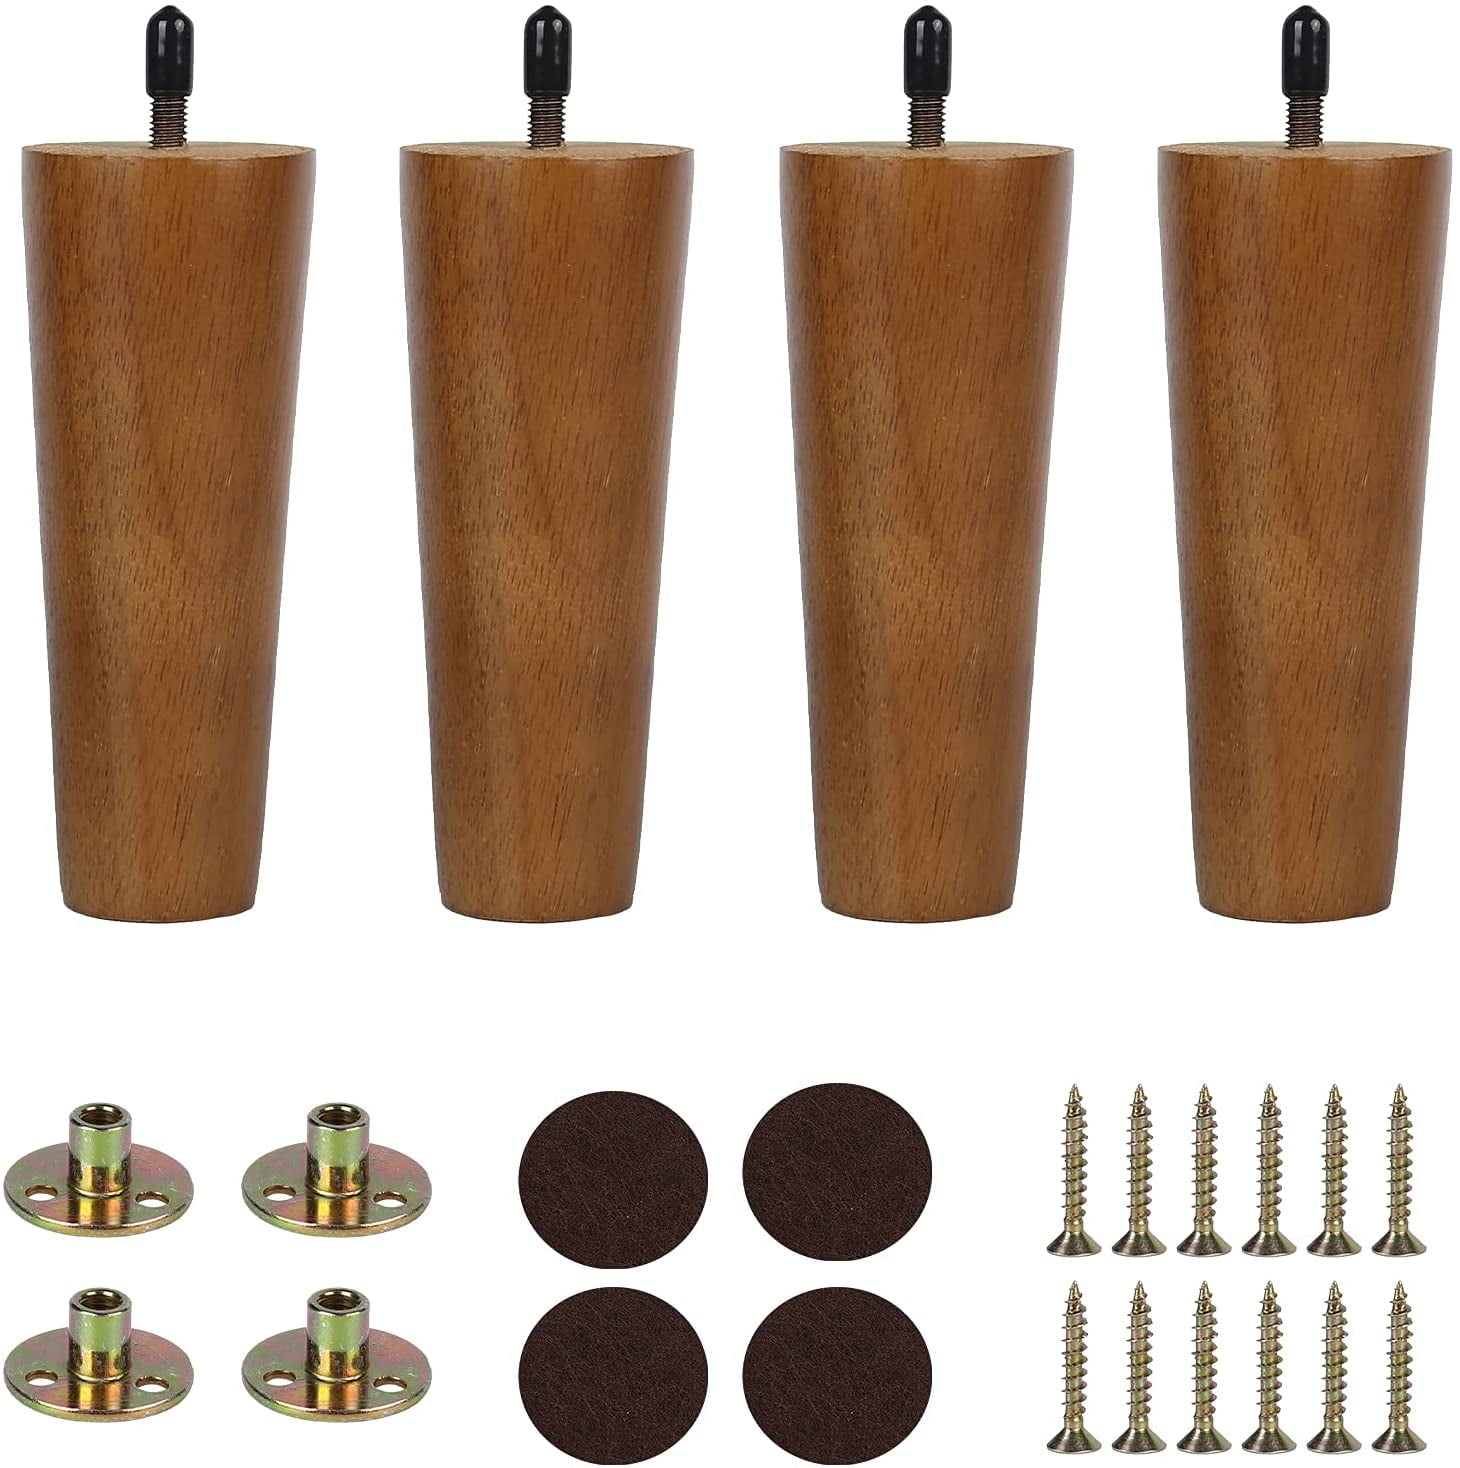 Wood Furniture Legs 4 inch MCM Sofa Legs for Dresser Cabinet Couch Brown 4pcs 